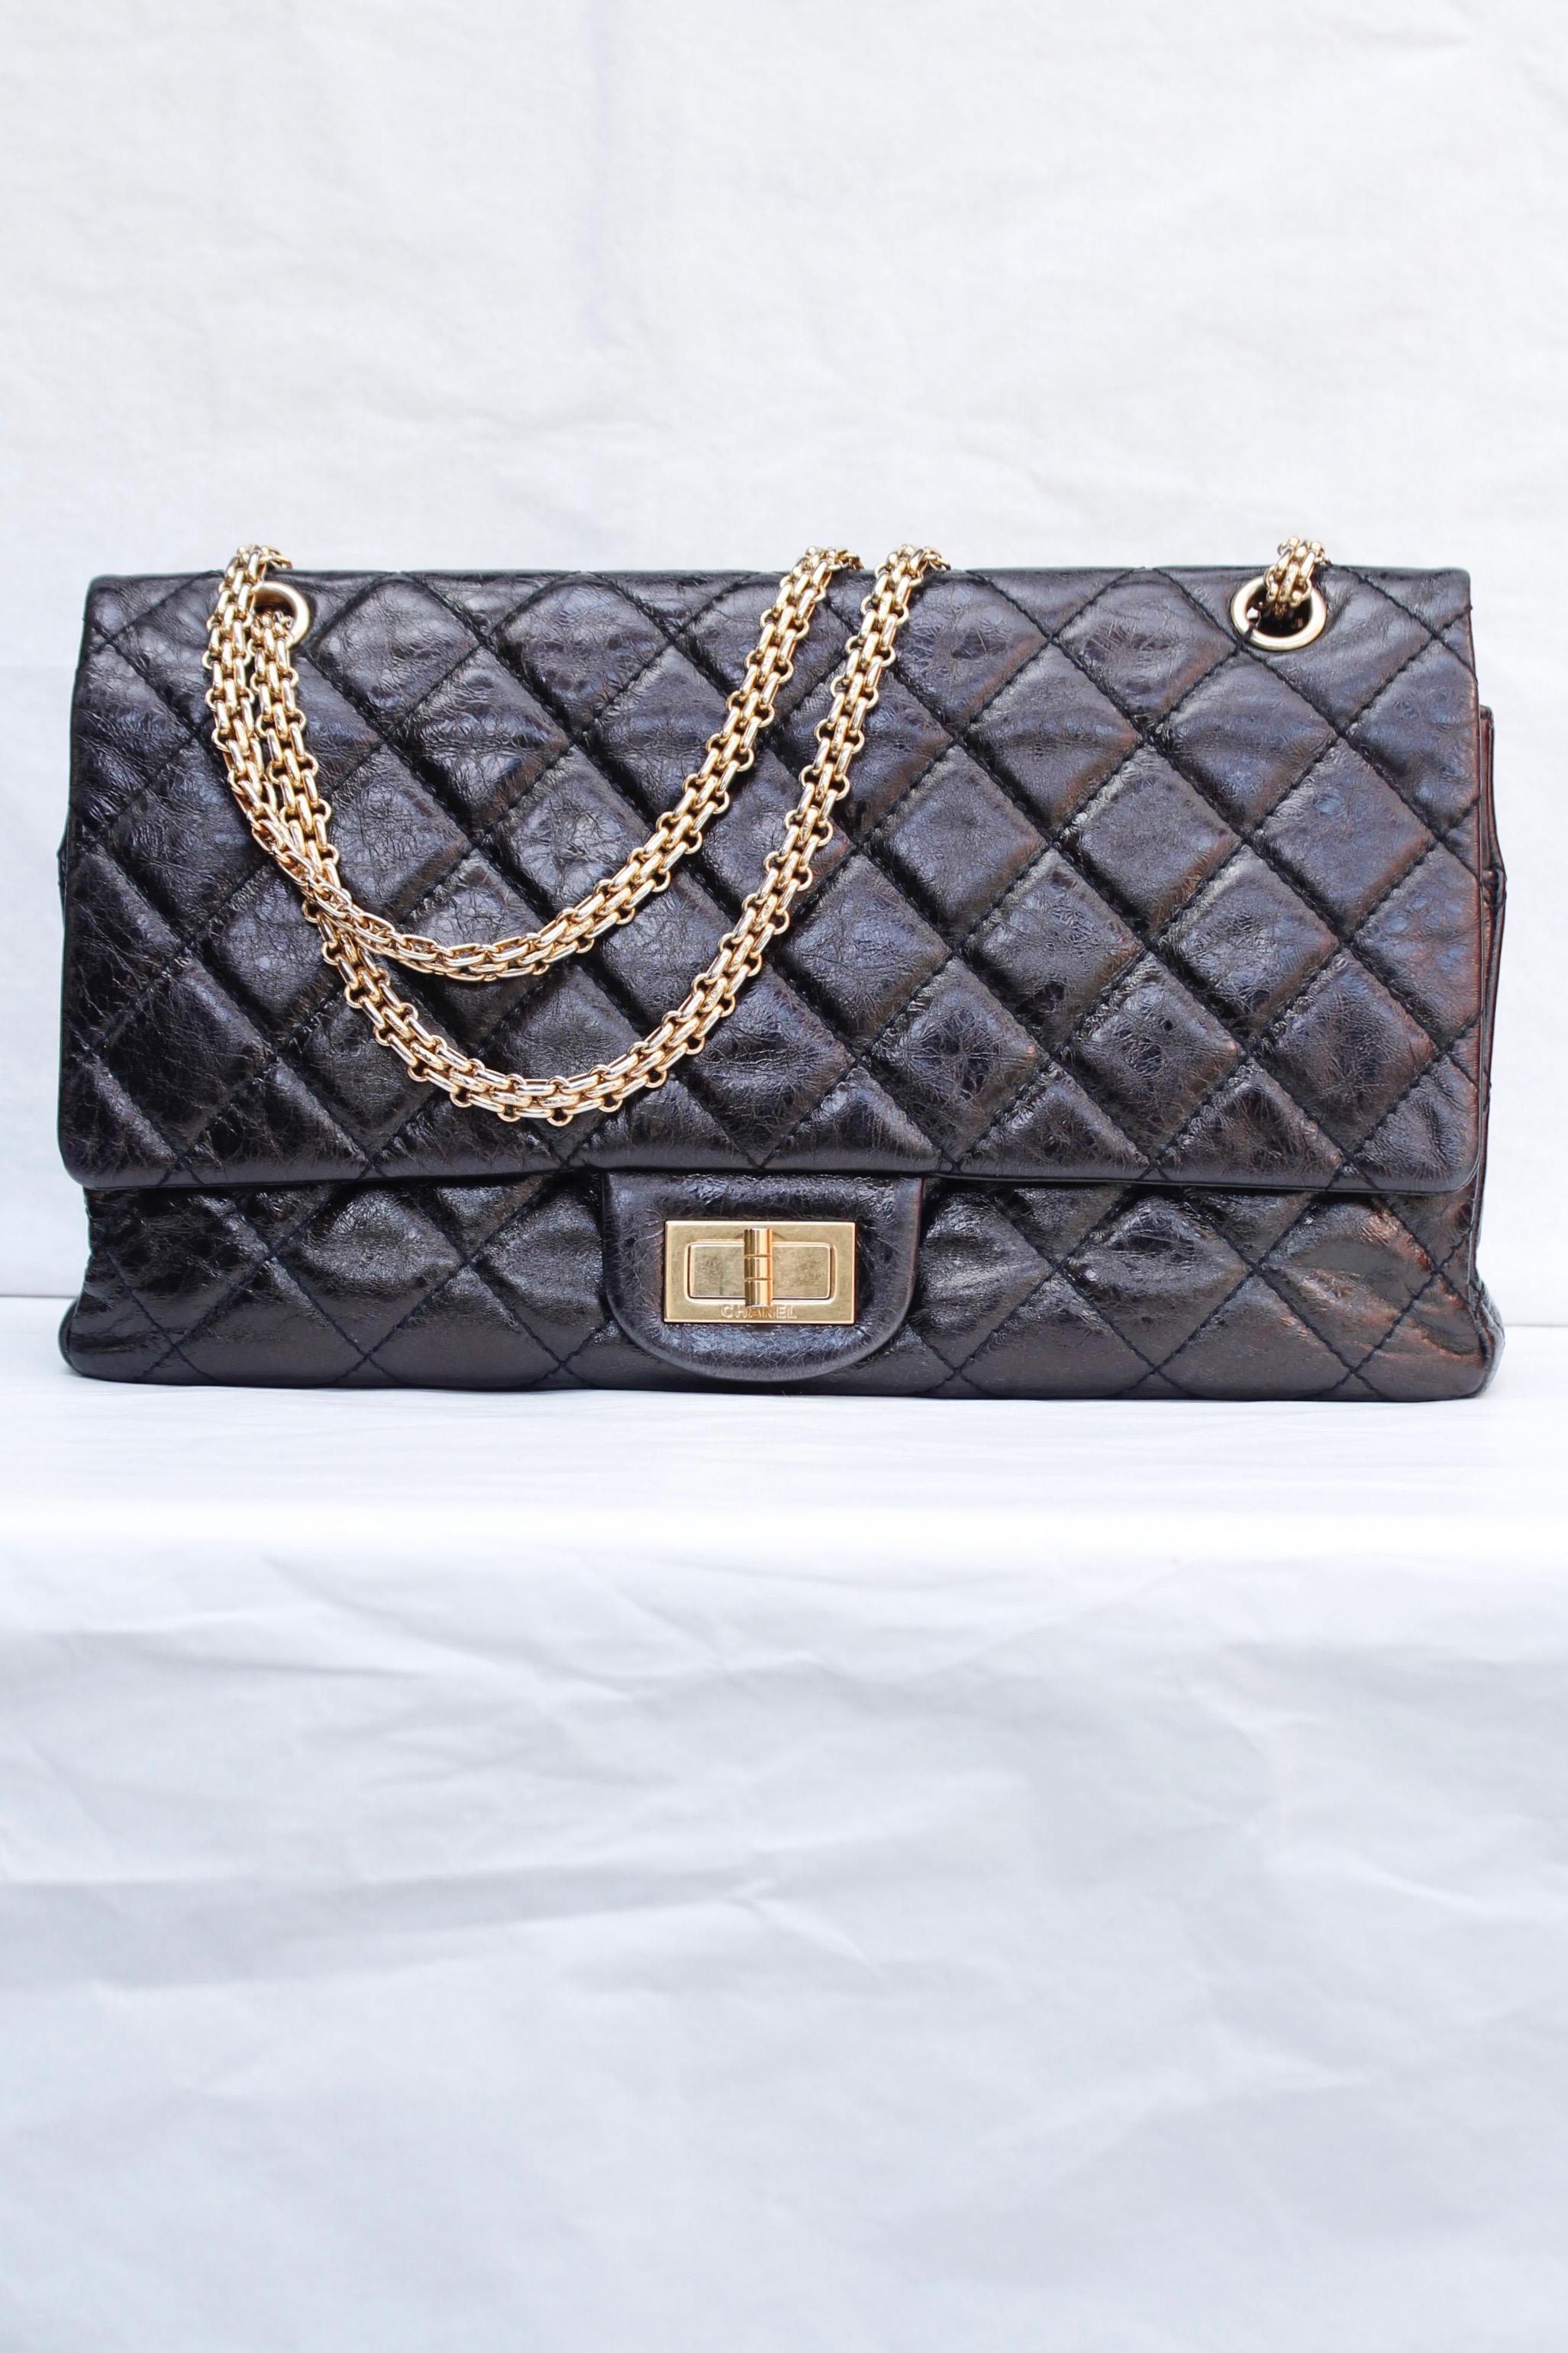 CHANEL (Made in France) Iconic 2.55 bag in brown/black cracked patent leather, with gilded metal hardware. It can be worn over the shoulder or cross-body with its long sliding chain. One patch pocket in the back. Twist lock closure.

The first flap